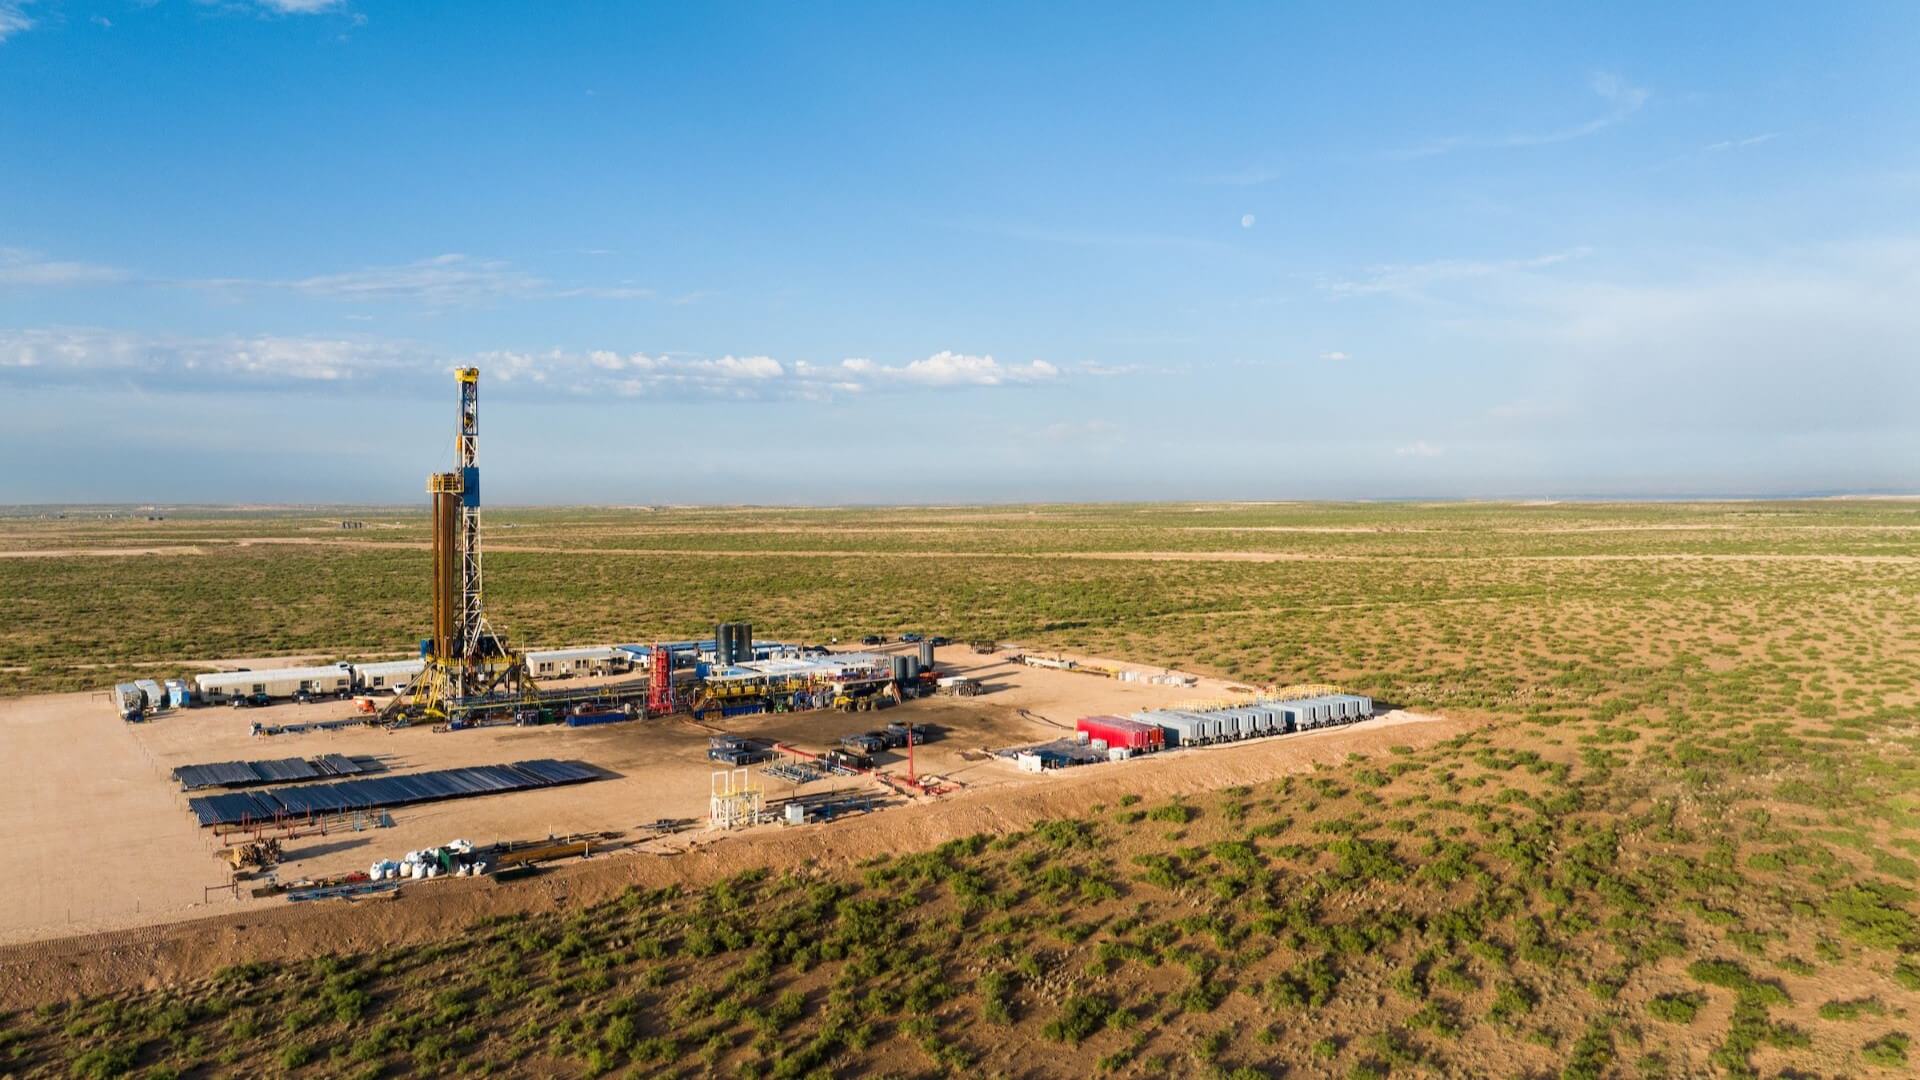 Aerial overview of unconventional drilling operations in flat, scrubby landscape